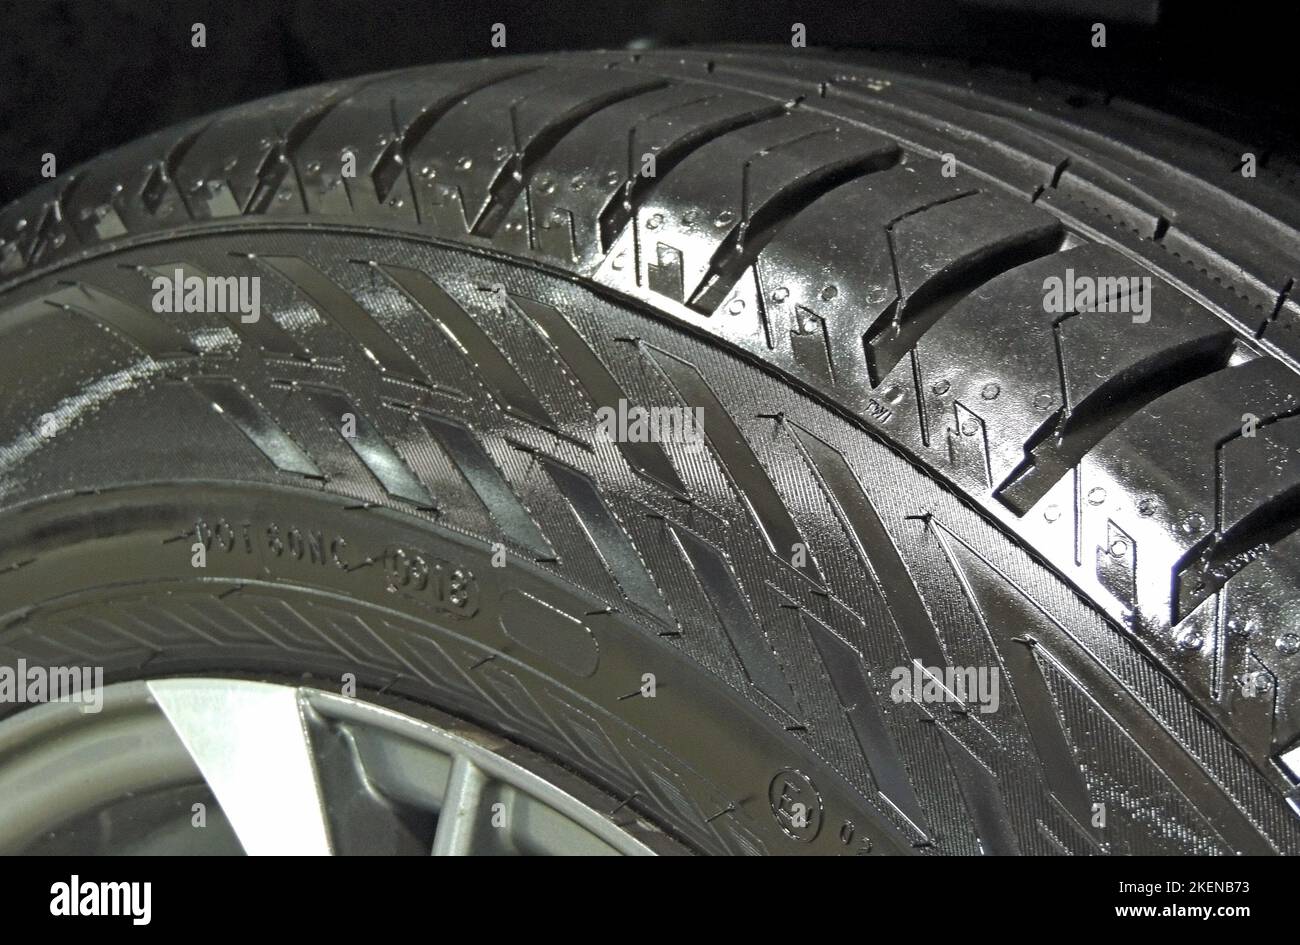 Polished sidewall of car tire on the alloy wheel rim close up Stock Photo